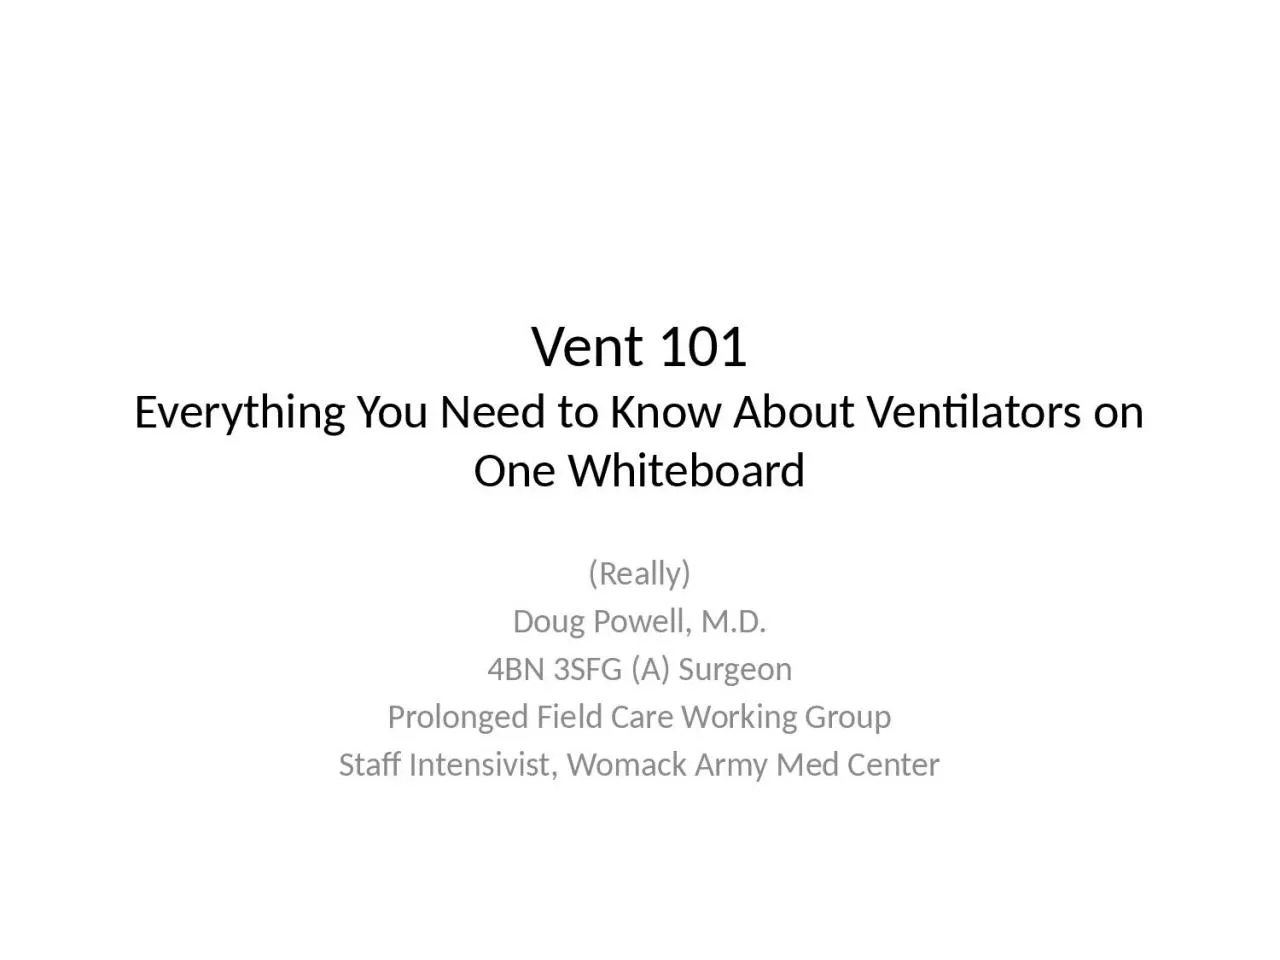 Vent 101 Everything You Need to Know About Ventilators on One Whiteboard